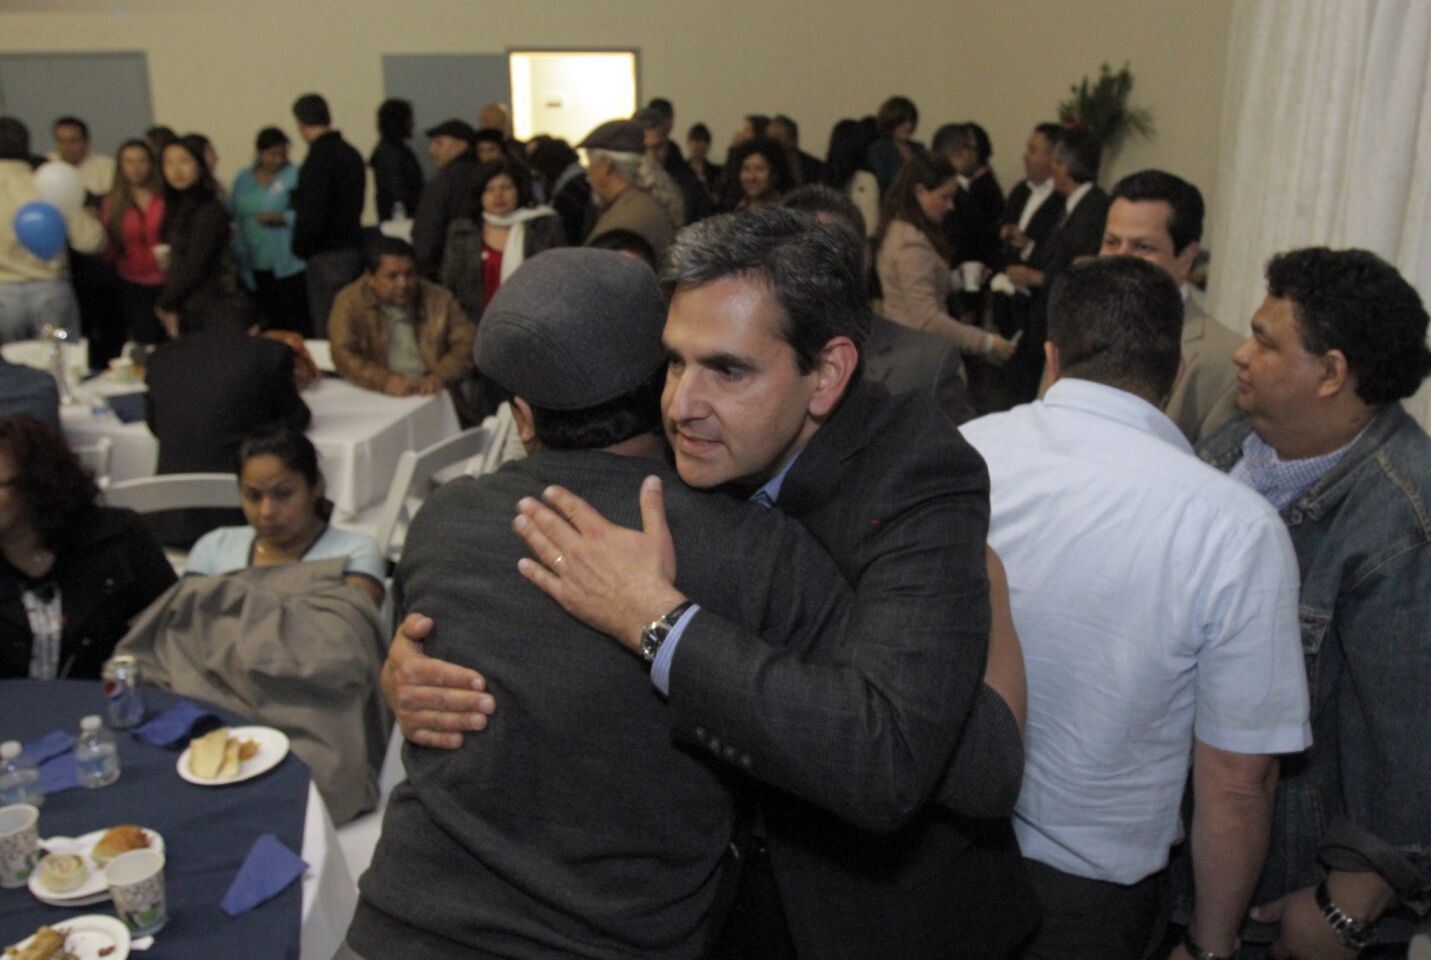 Jose Gardea, candidate for L.A. City Council District 1, is greeted by his supporters at his election-night party in Los Angeles.